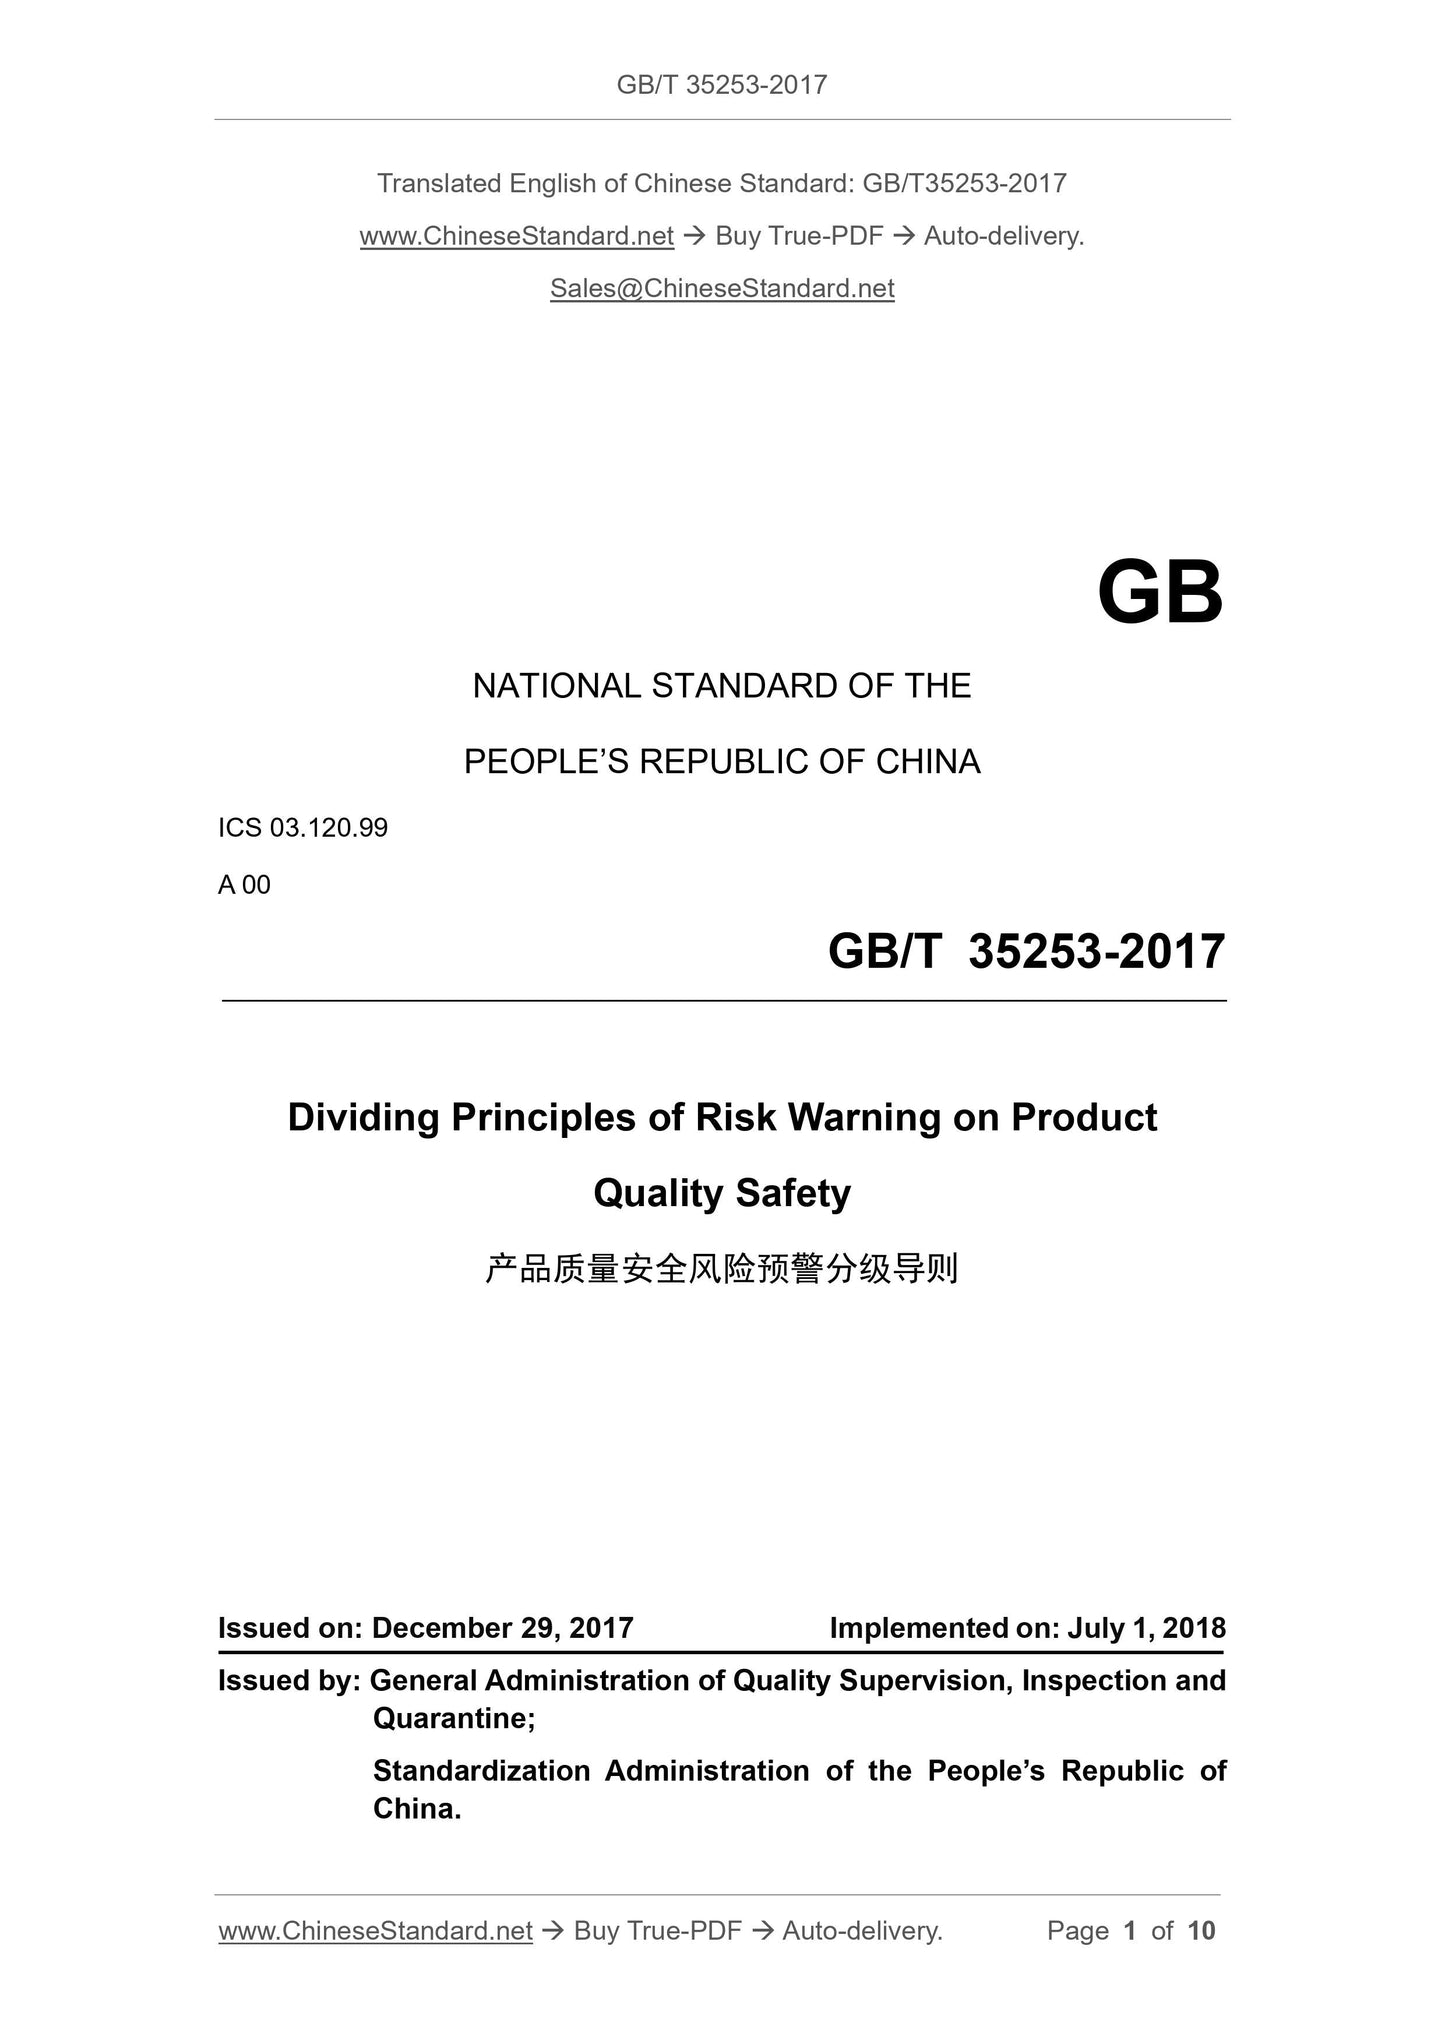 GB/T 35253-2017 Page 1